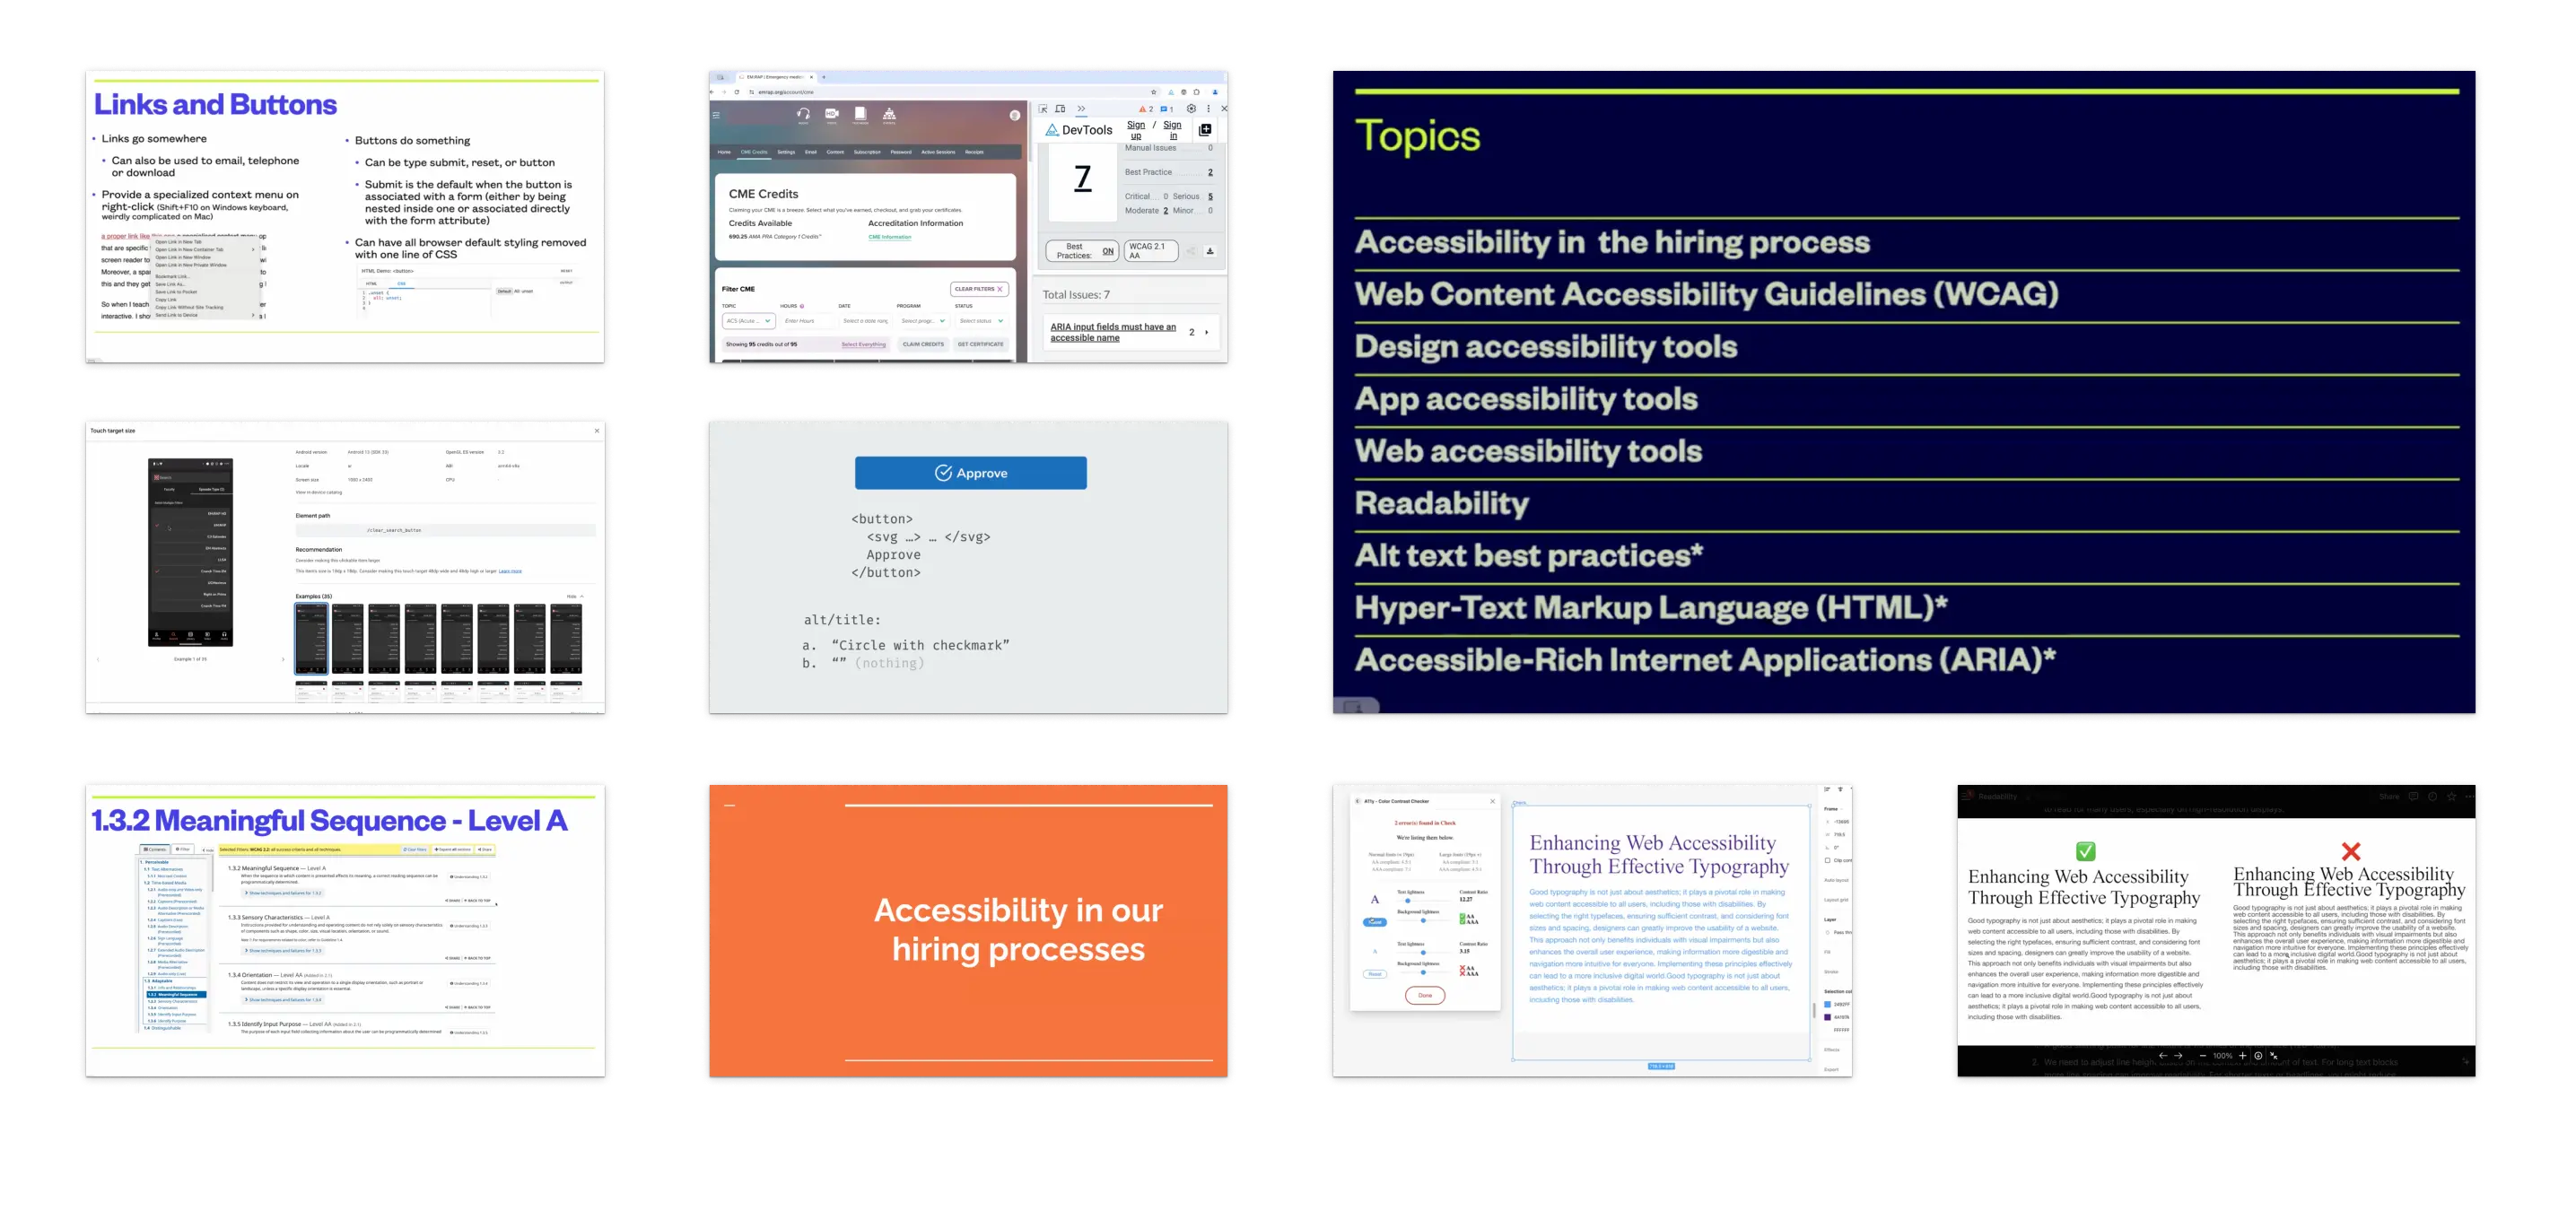 Nine screenshots of slideshows on accessibility topics including WCAG, Links and Buttons, Accessibility in our hiring process, and other accessibility tools